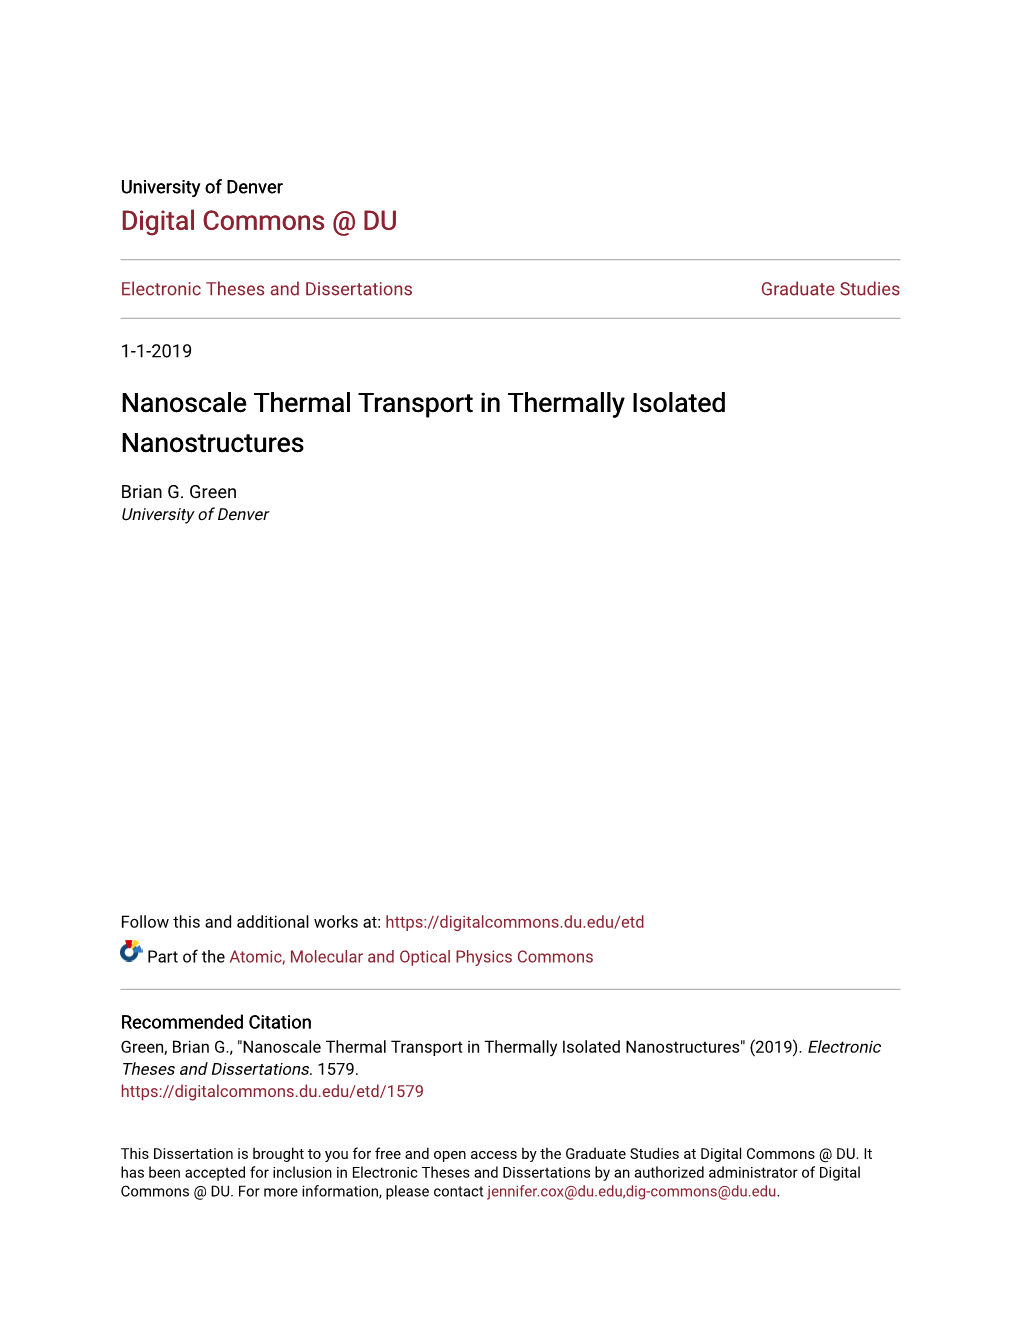 Nanoscale Thermal Transport in Thermally Isolated Nanostructures